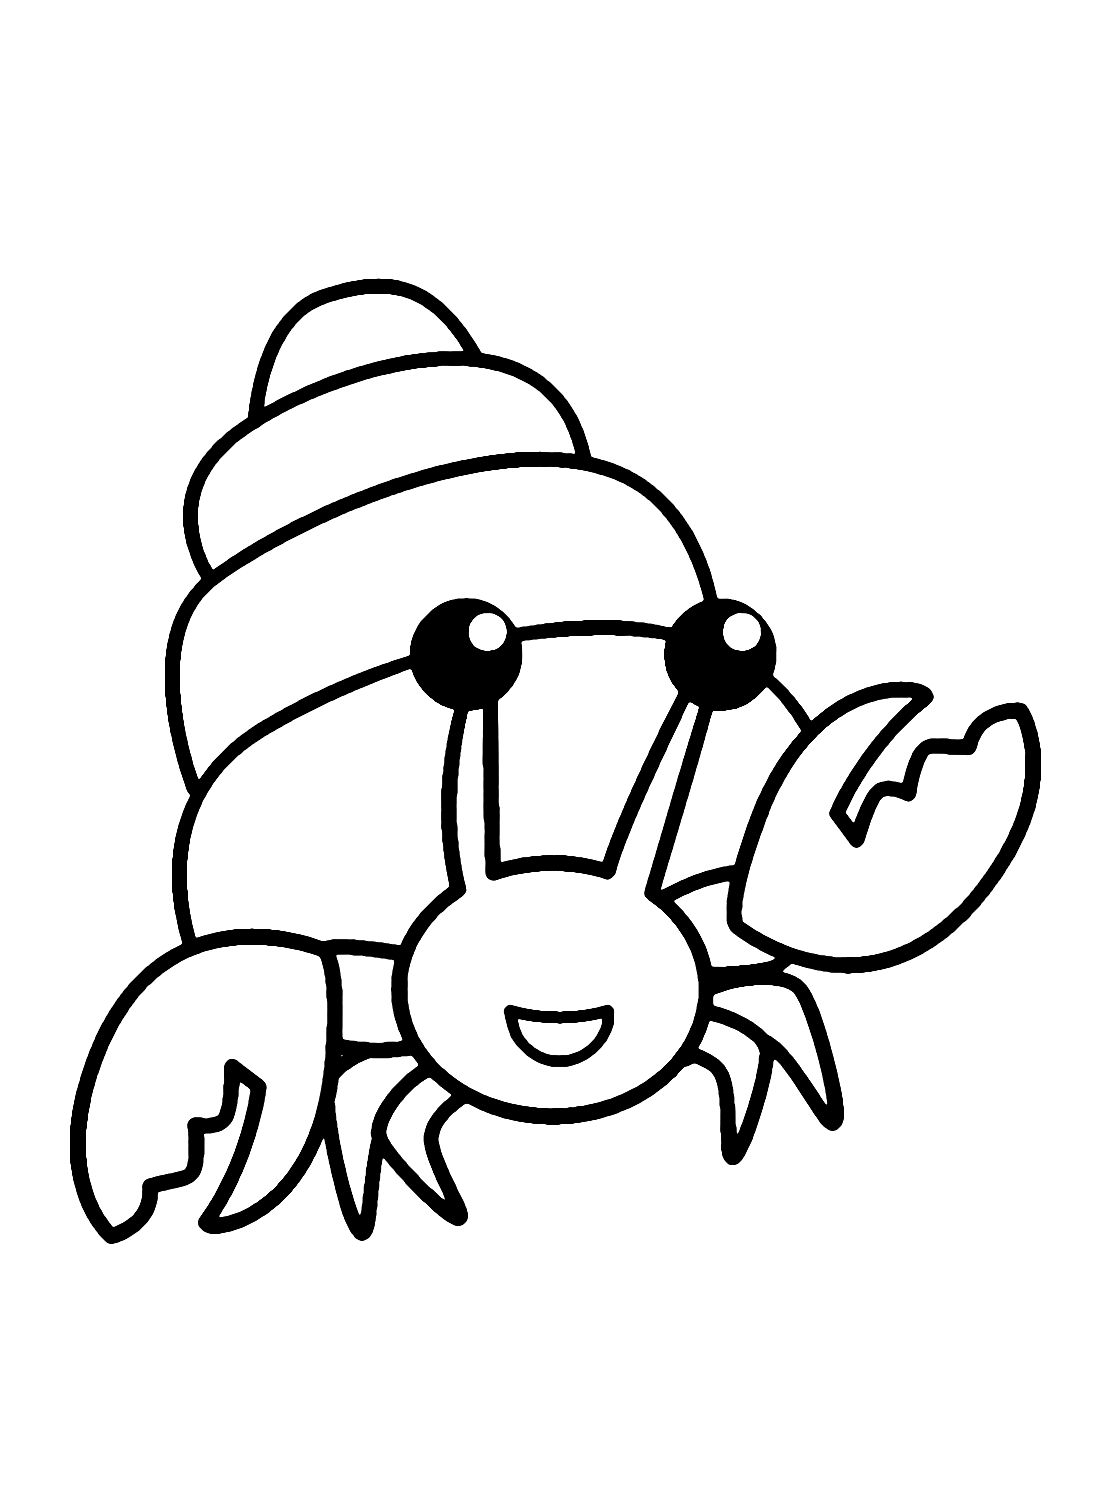 Hermit Crab to Print Coloring Page